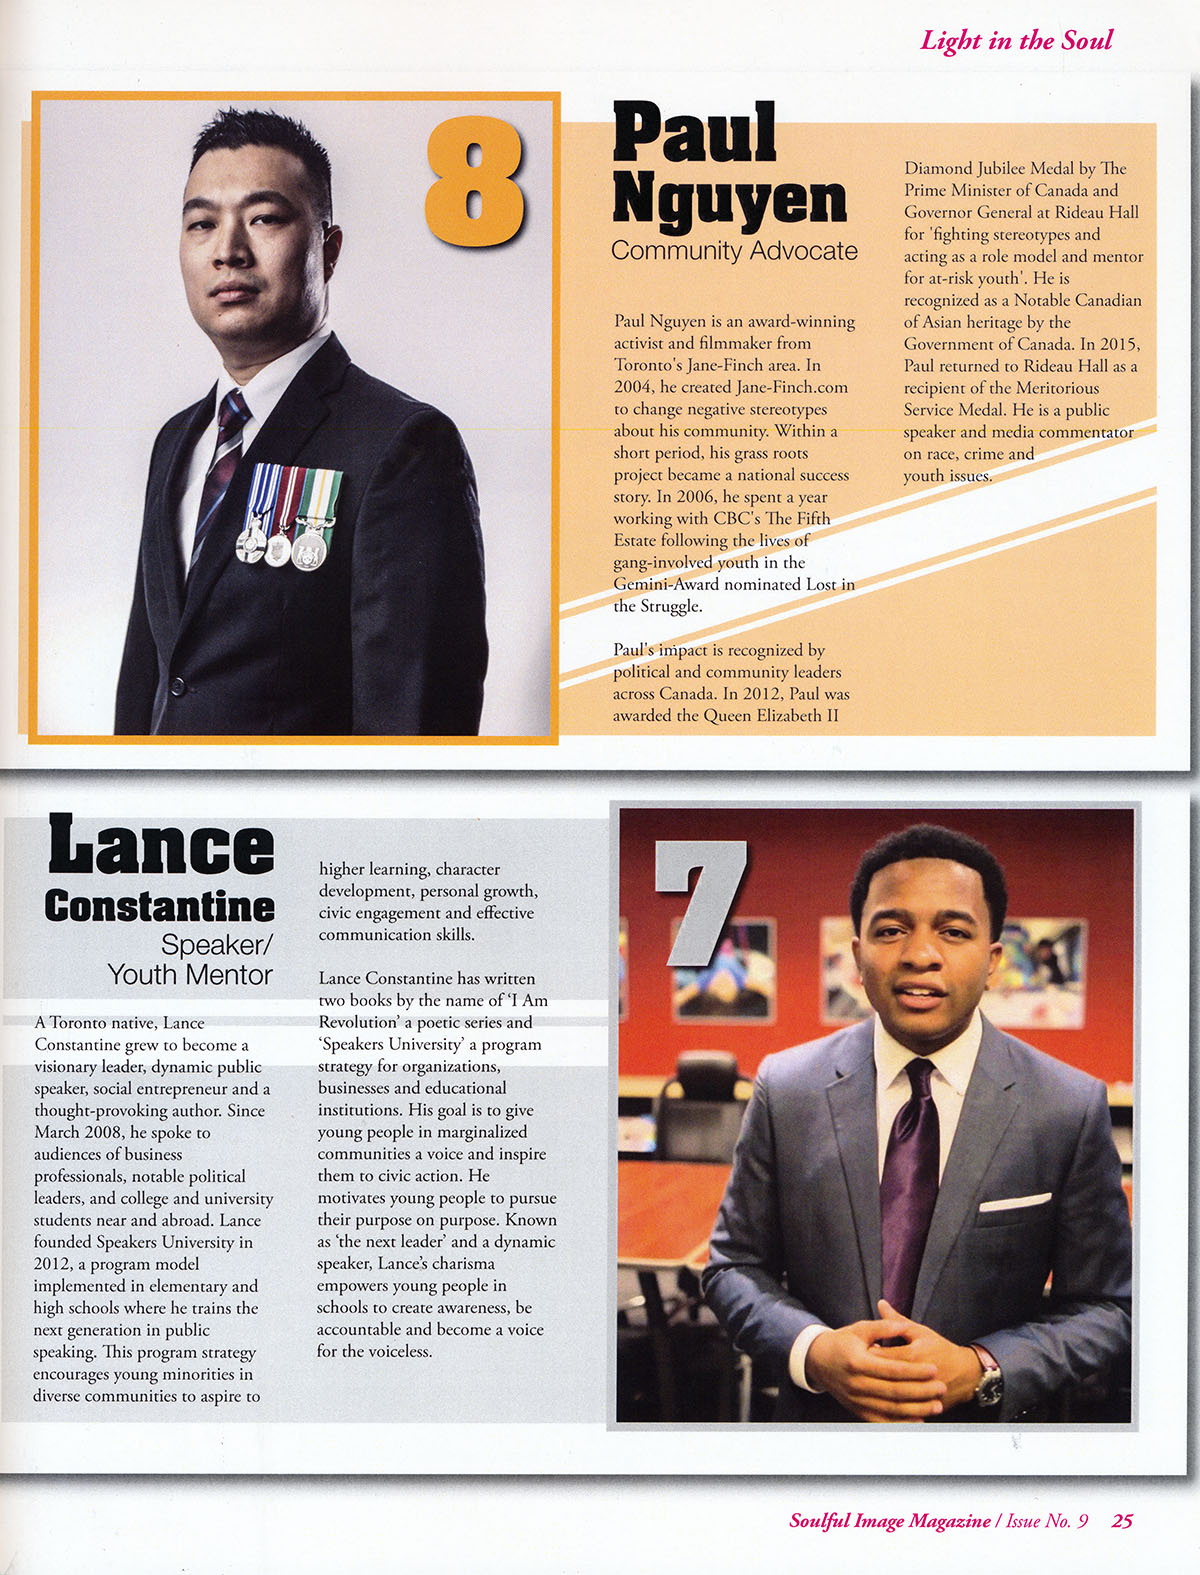 Paul Nguyen is featured in the men's edition of Soulful Image Magazine